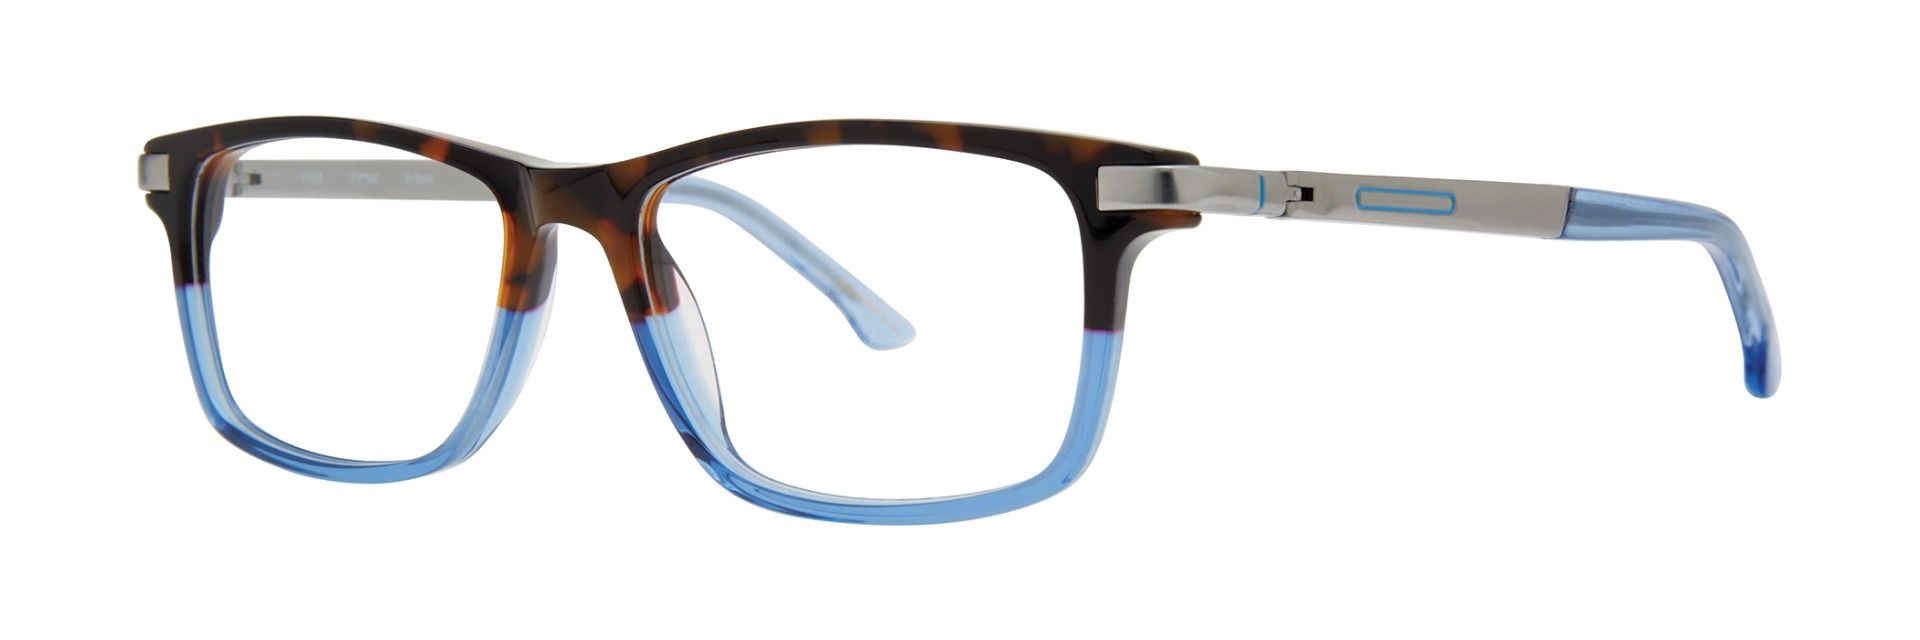 Unisex teen’s prescription eyewear: A side view of the Ondeck model with half brown tortoise and half clear light blue frame. It is made of acetate and has a rectangular shape.